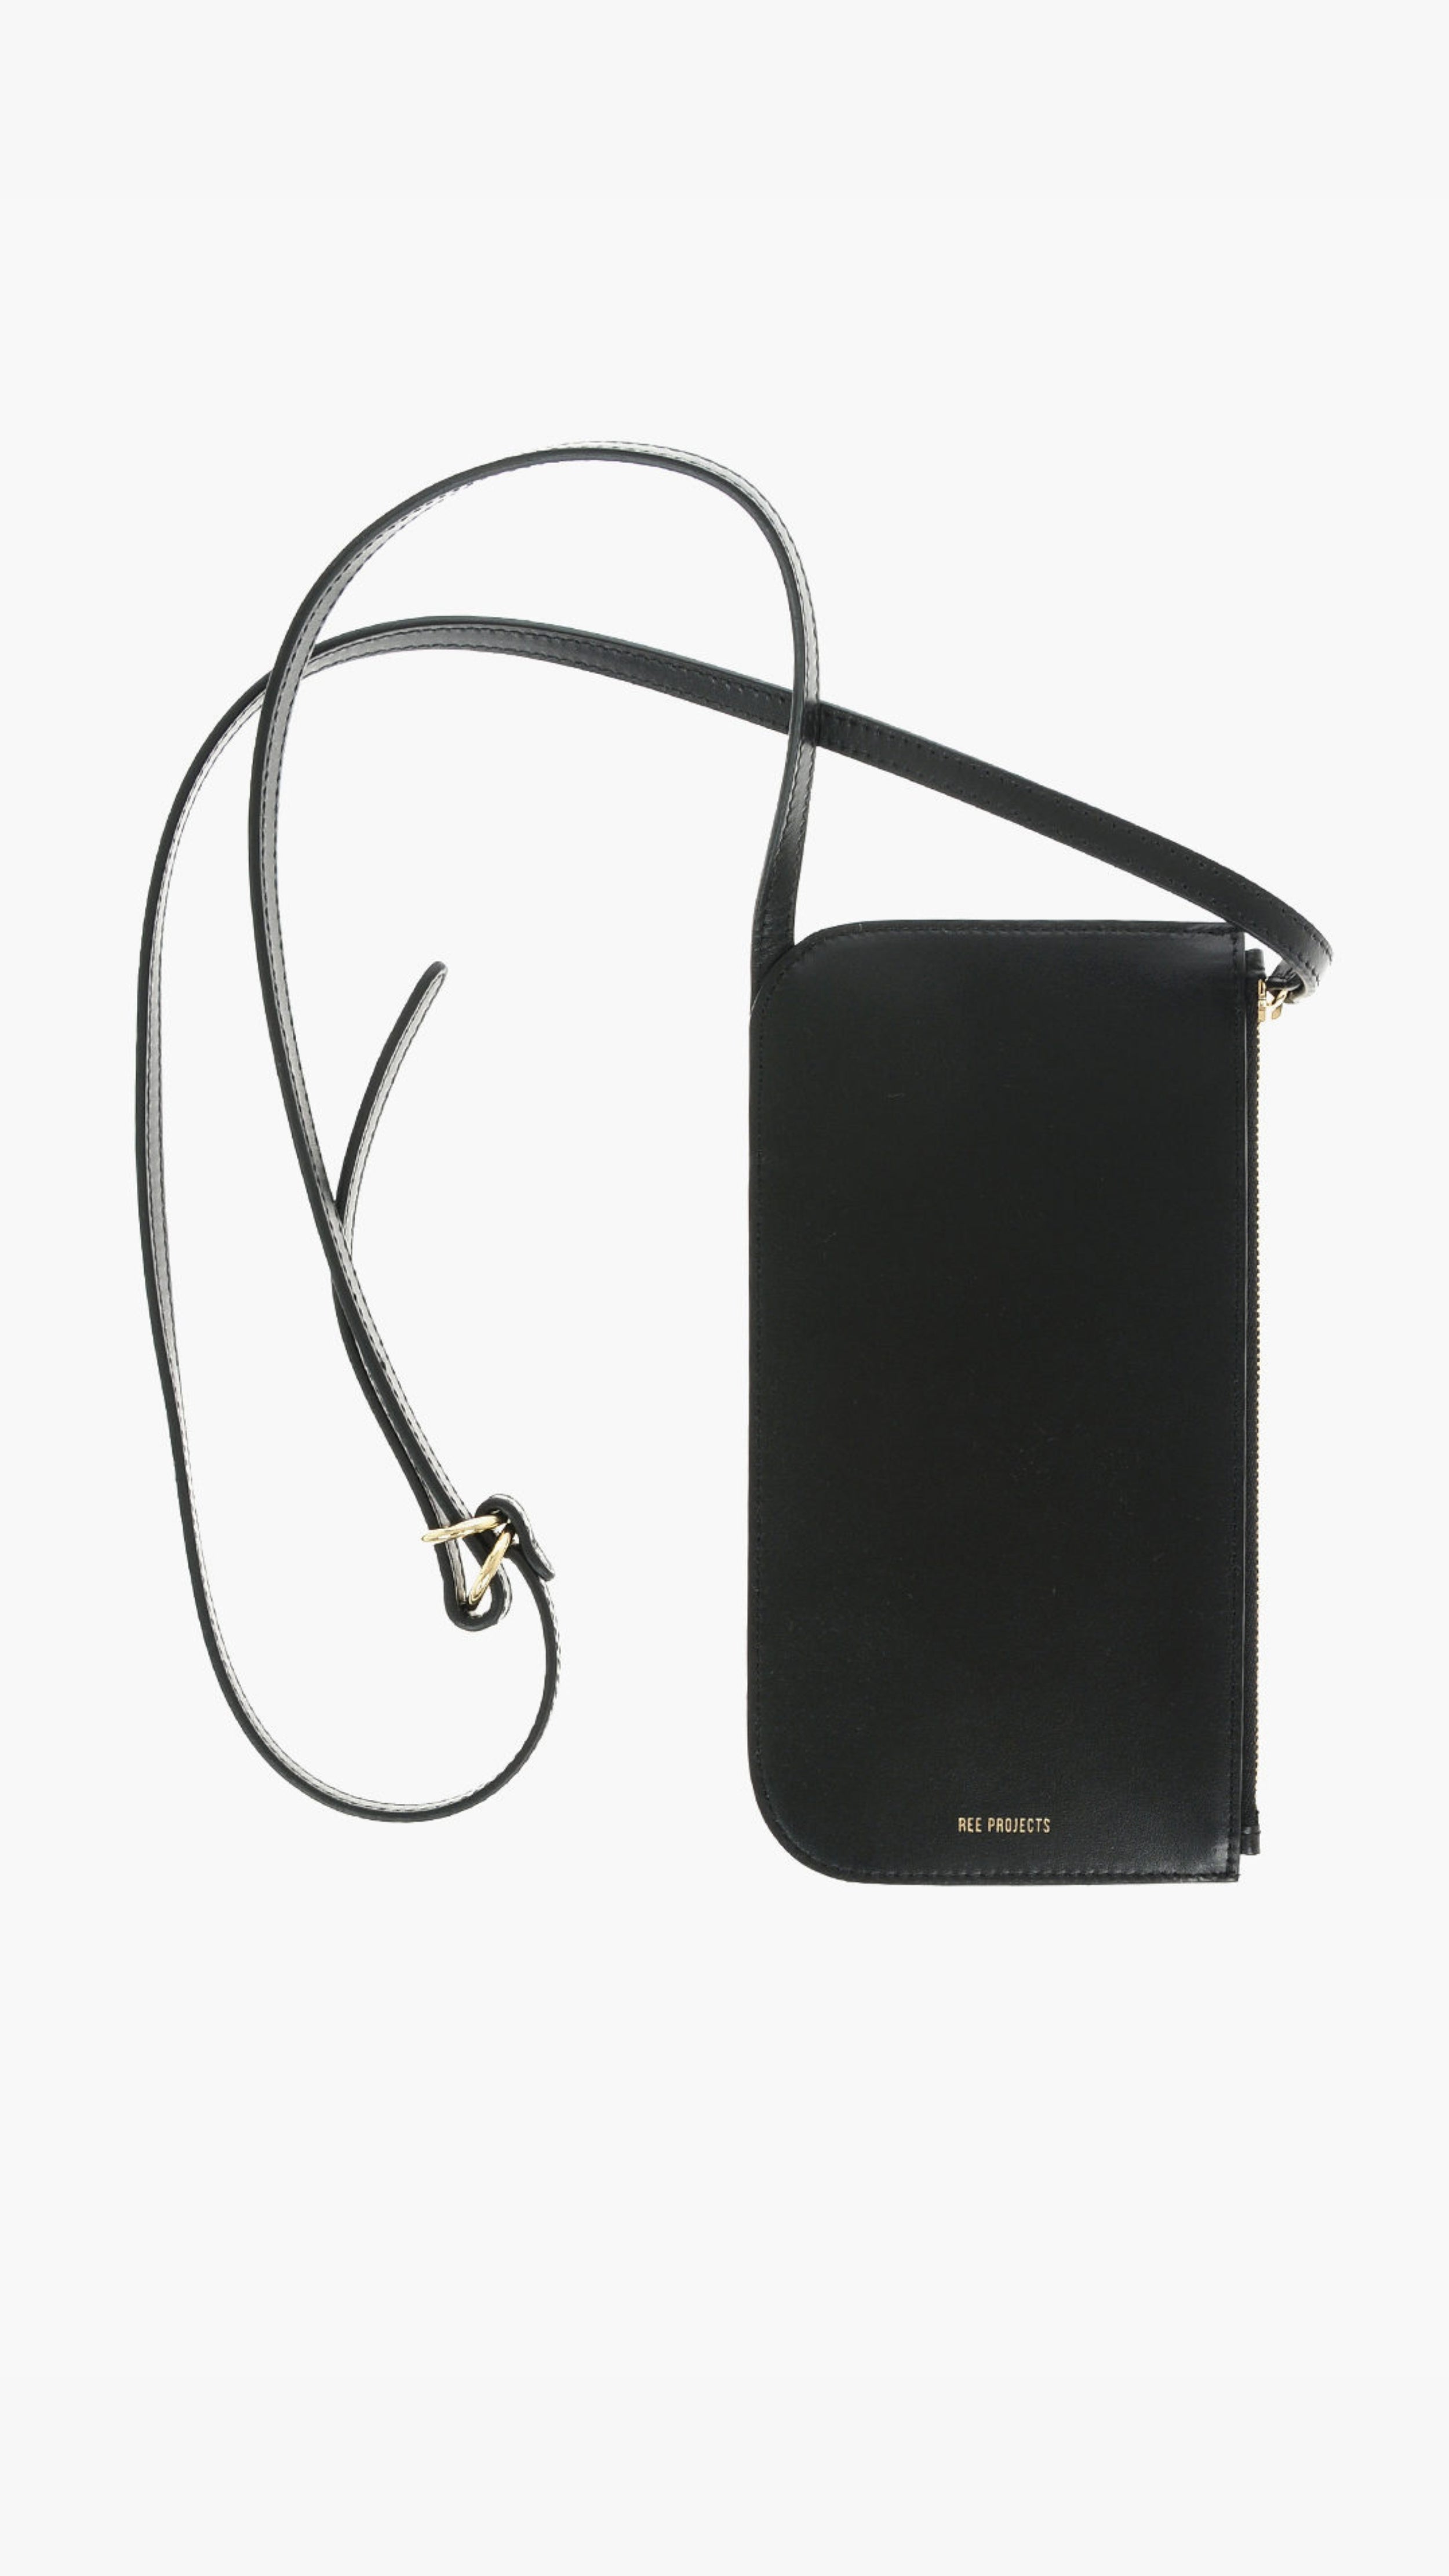 Ree Projects, Do Neck Pouch in Black.  A small crossbody of necklace pouch purse to store your phone and other small items. It features adjustable straps to make it easy to wear across the body as a neck pouch or over the shoulder bag. The exterior pocket features a card holder and a side zip closure for added security. Its has light gold tone hardware and single interior compartment. Product photo shown from front.